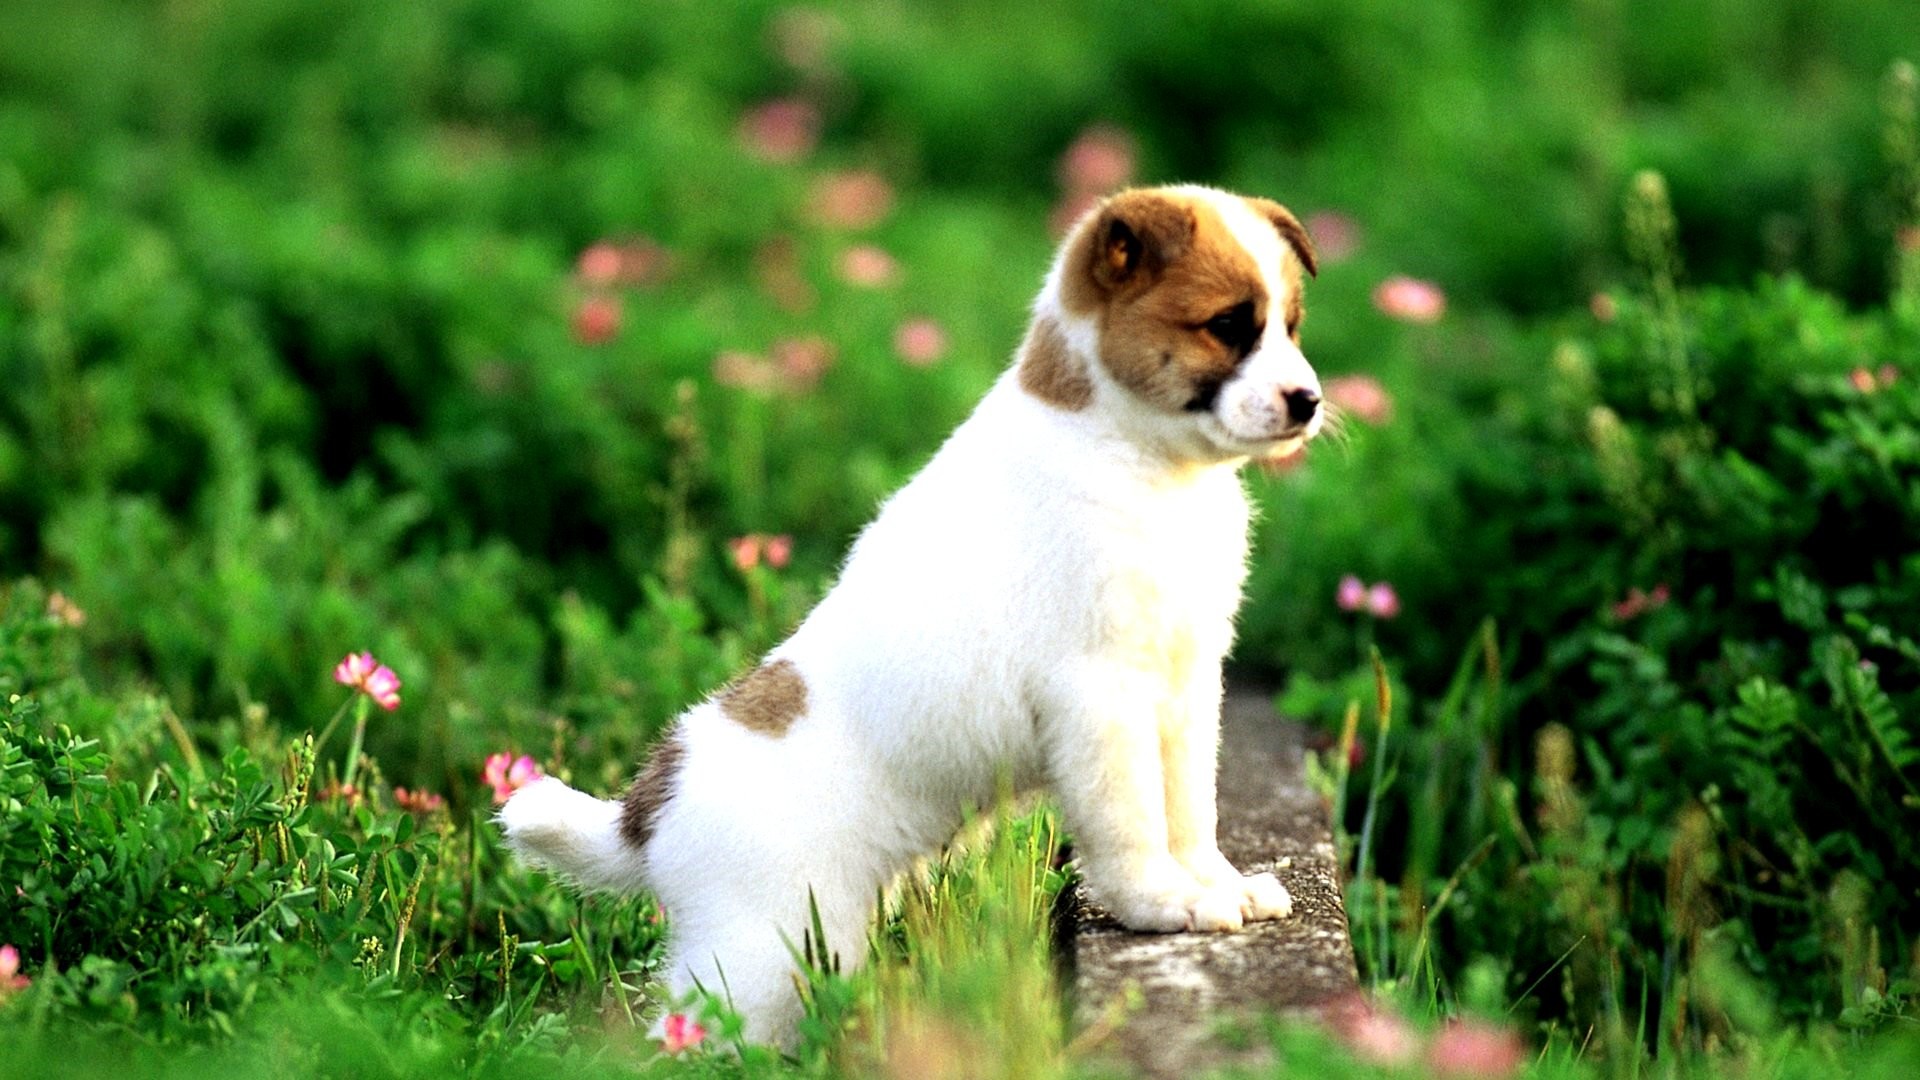 Free Puppy Wallpapers For Computer Wallpaper 1024ã768 - Animal Wallpaper Hd Download - HD Wallpaper 